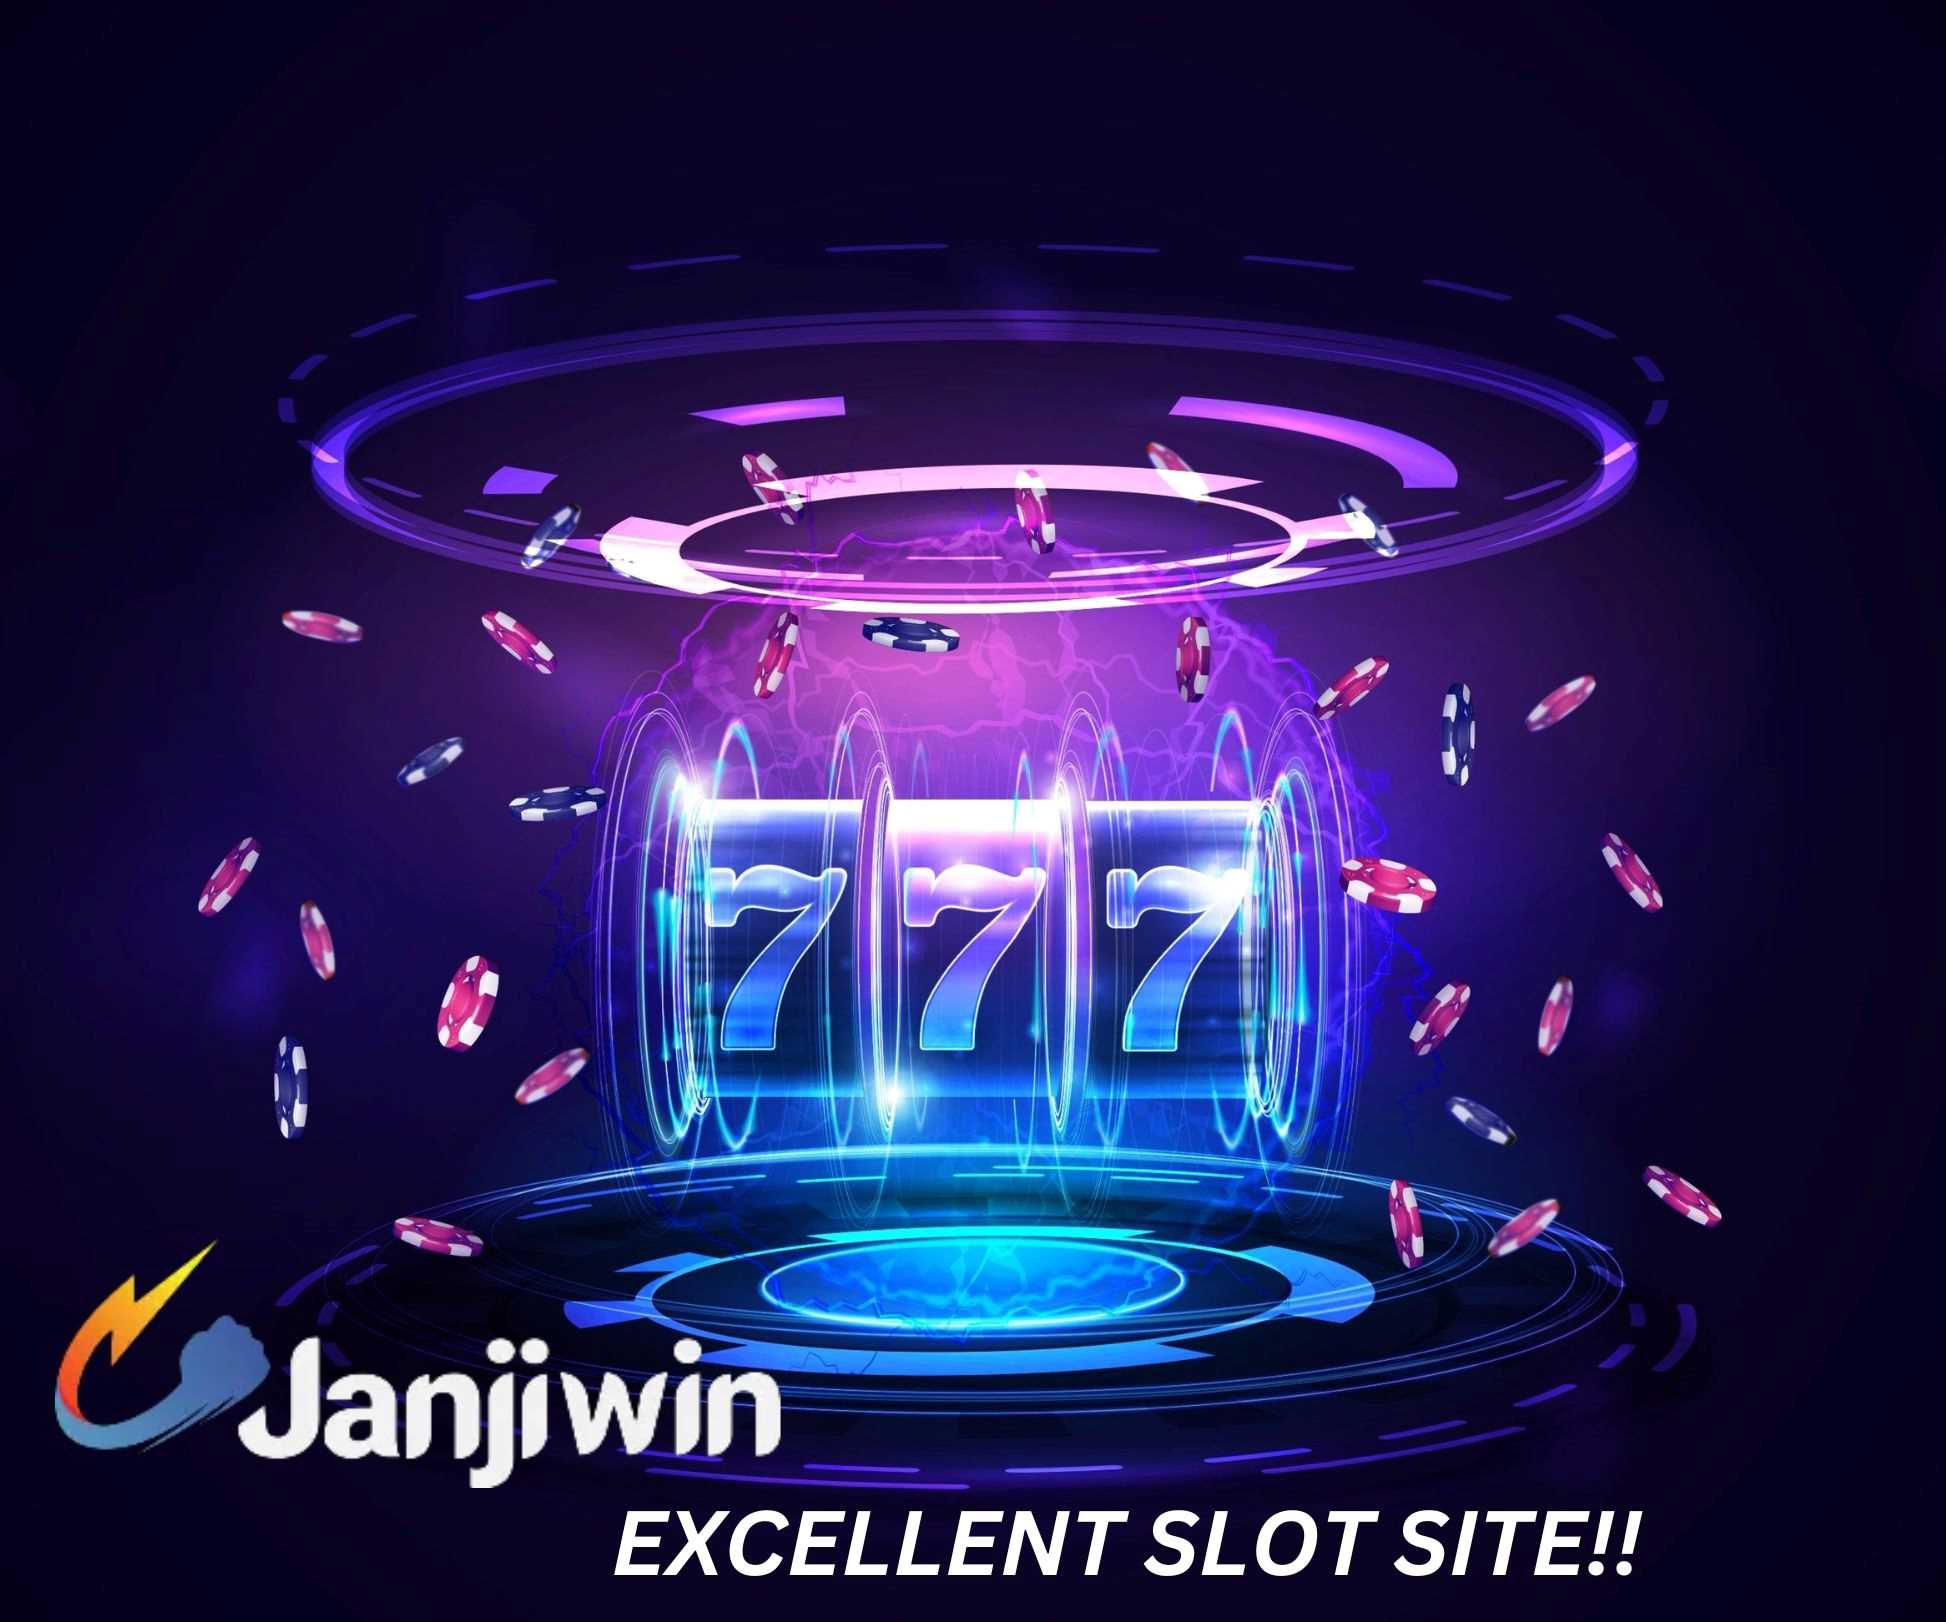 Knowledge before jumping into playing online slot